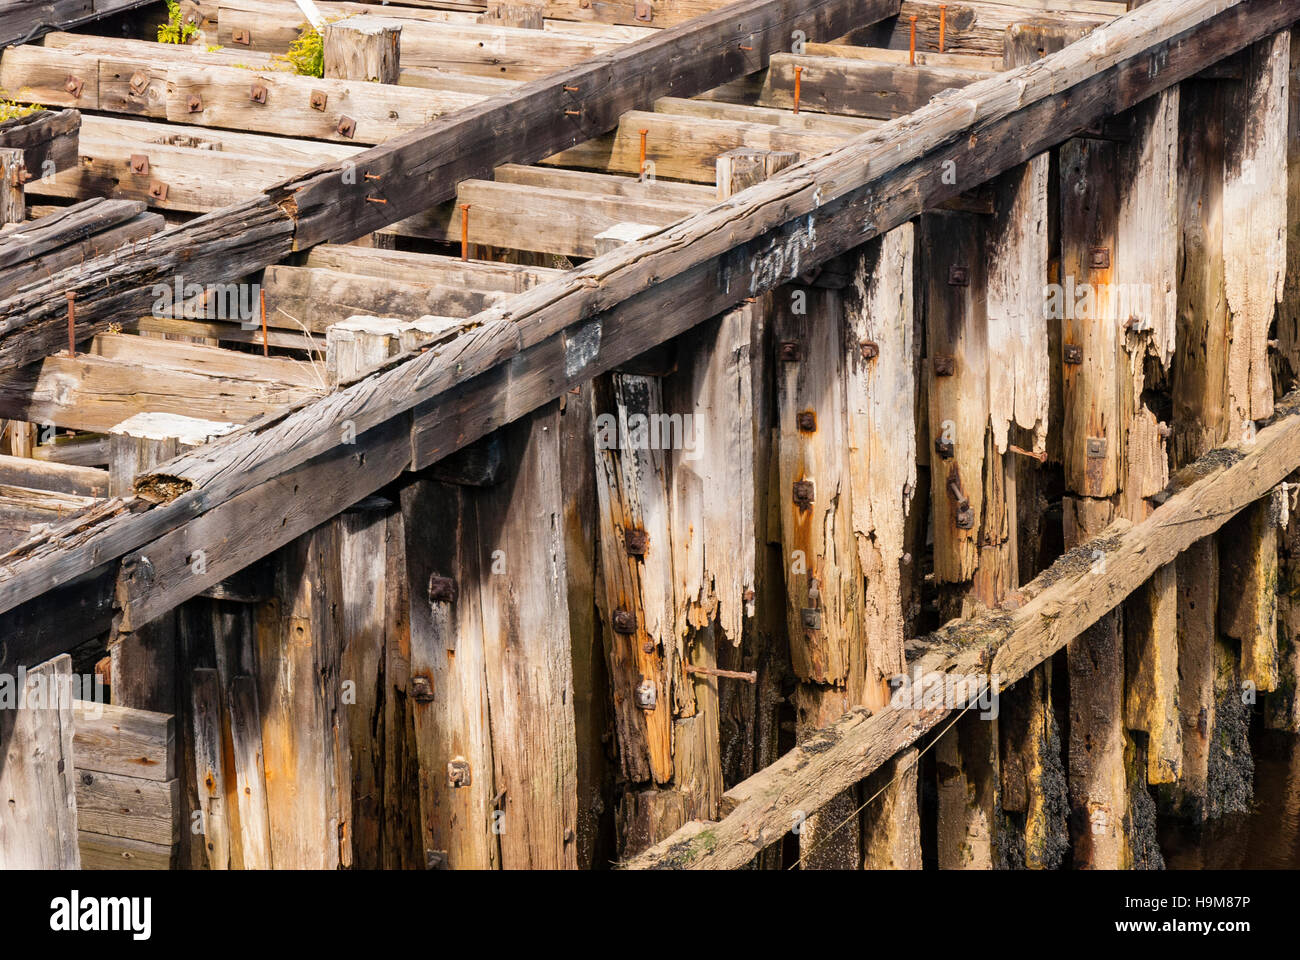 A close up of a decaying wooden pier background Stock Photo